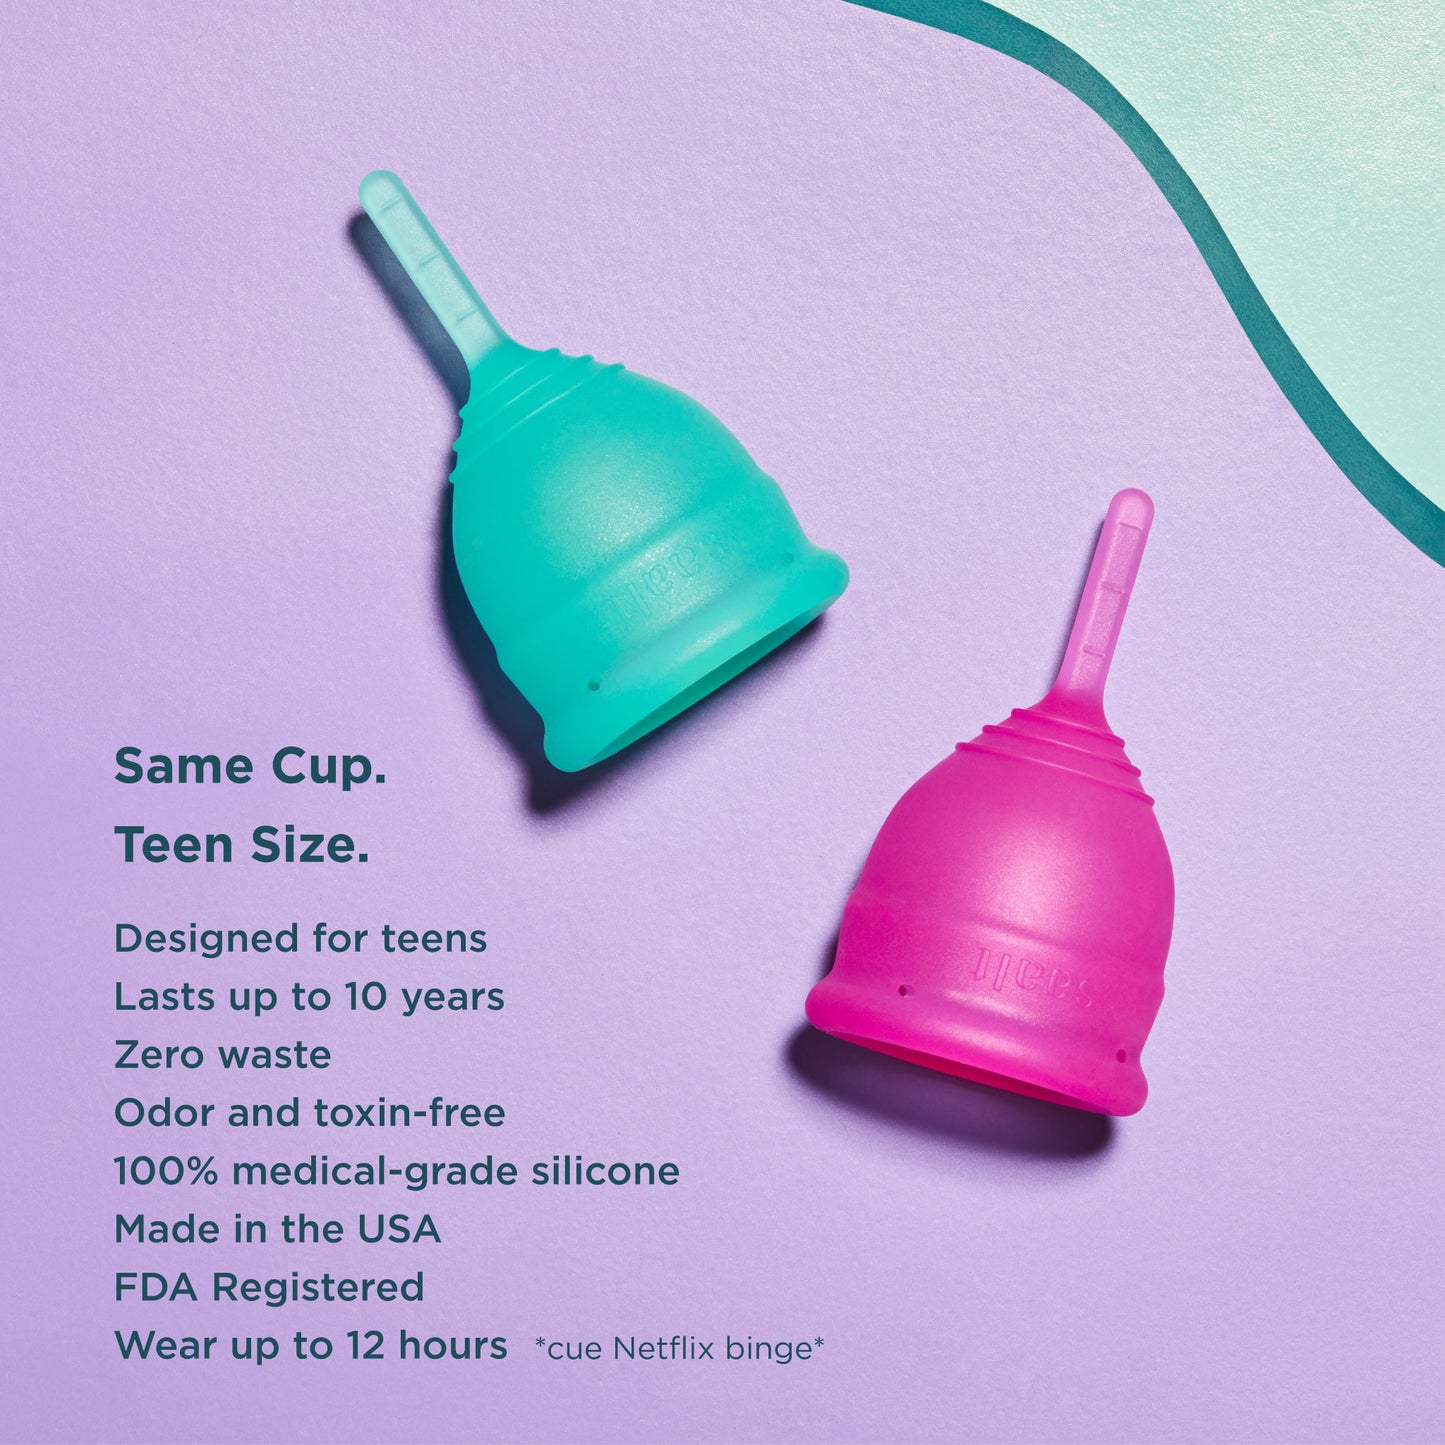 Green and rose teen menstrual cups.